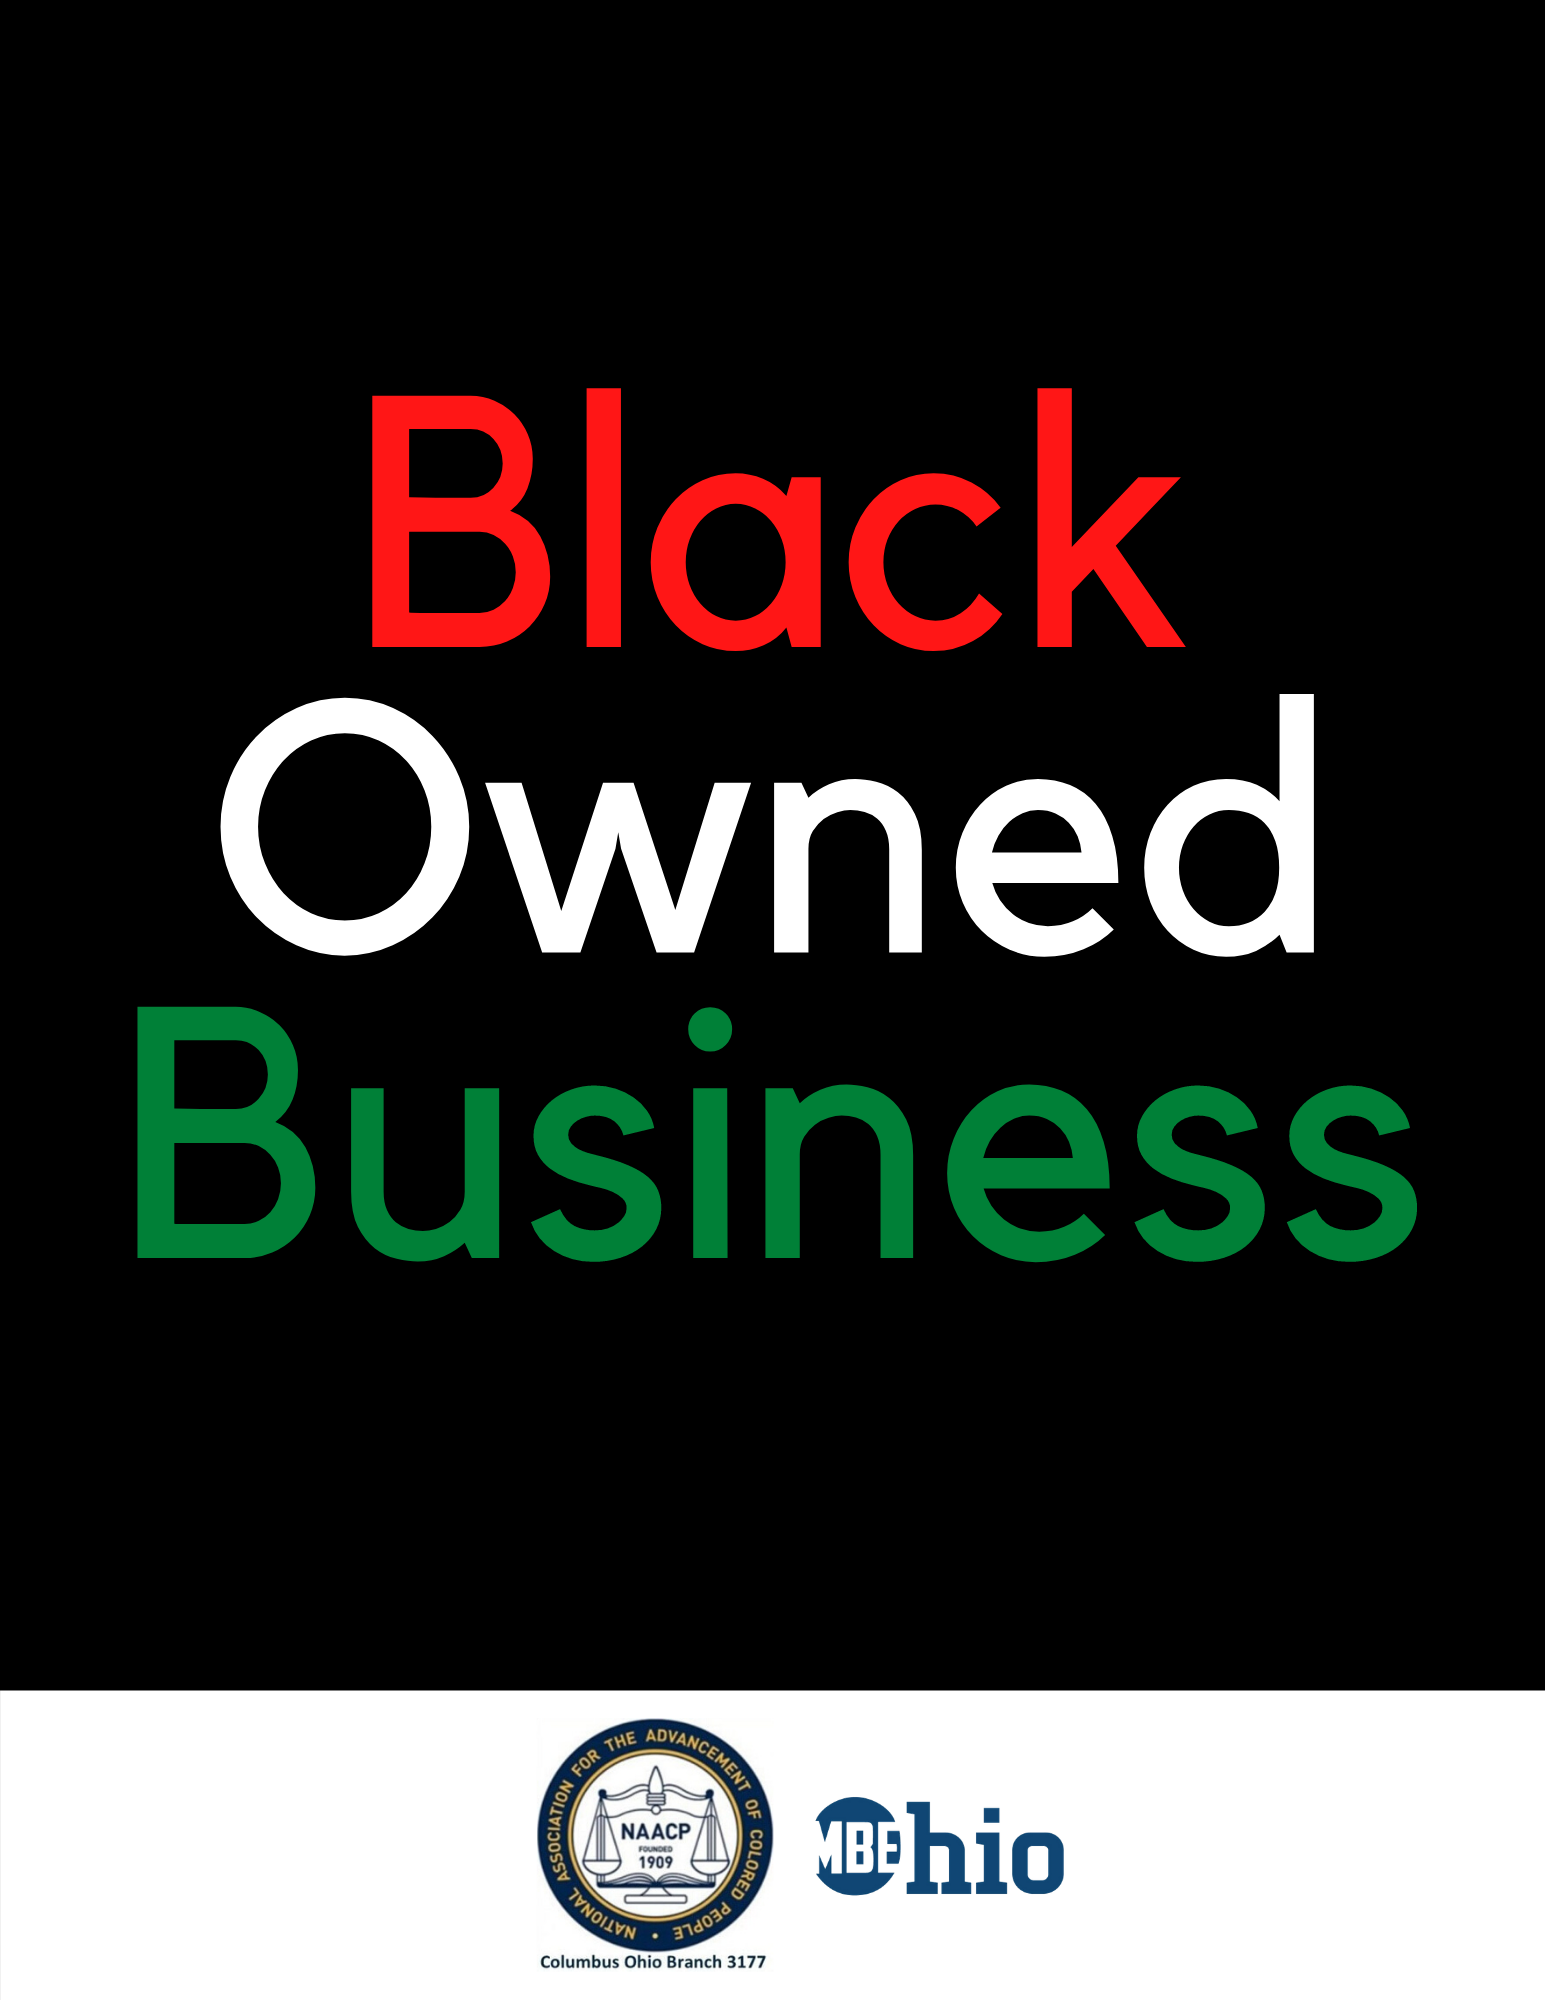 BlackOwned Business Sign OhioMBE